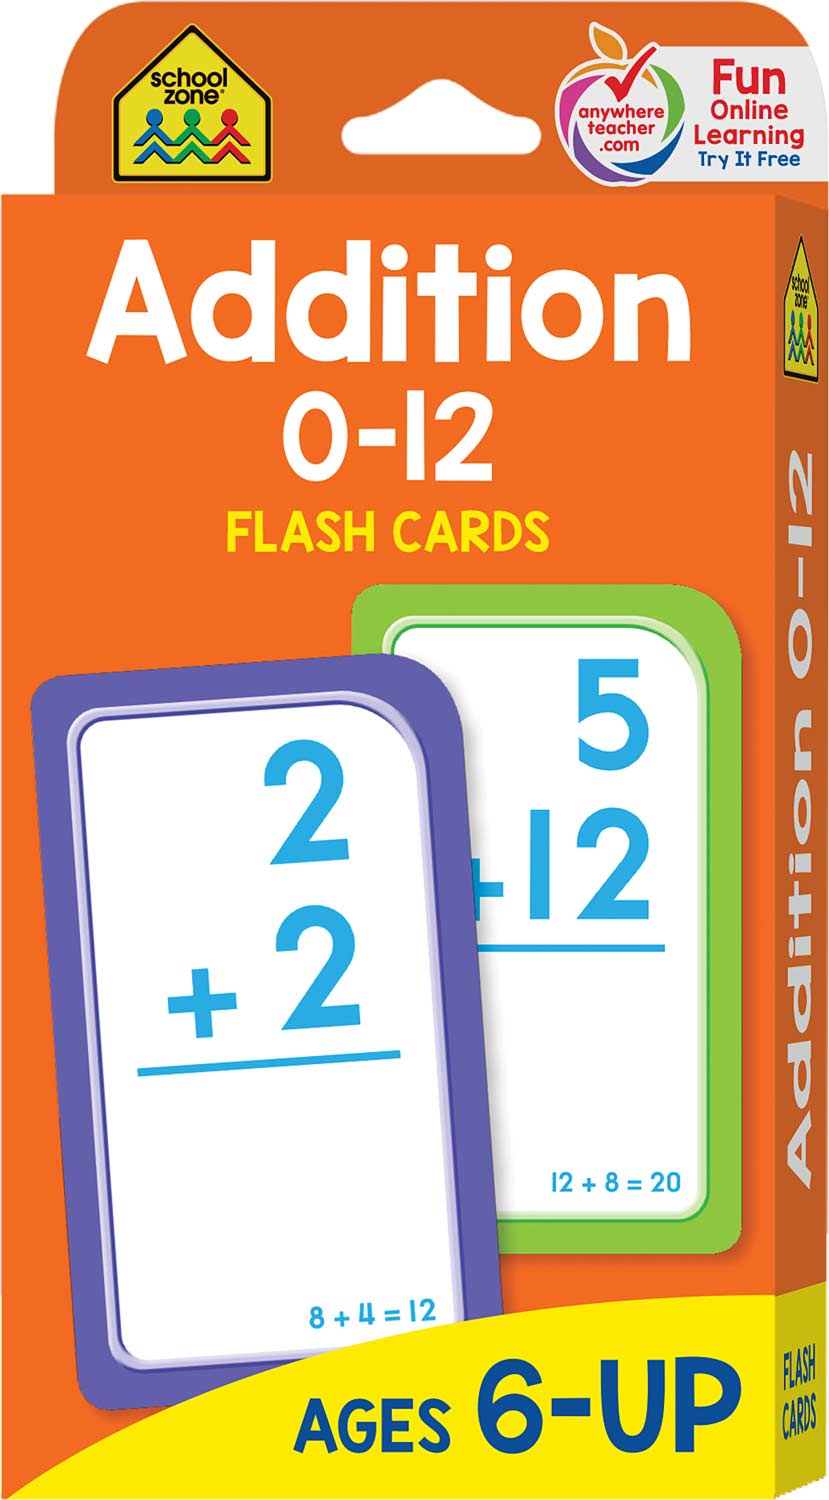 addition-flash-cards-math-flash-cards-by-school-zone-raff-and-friends